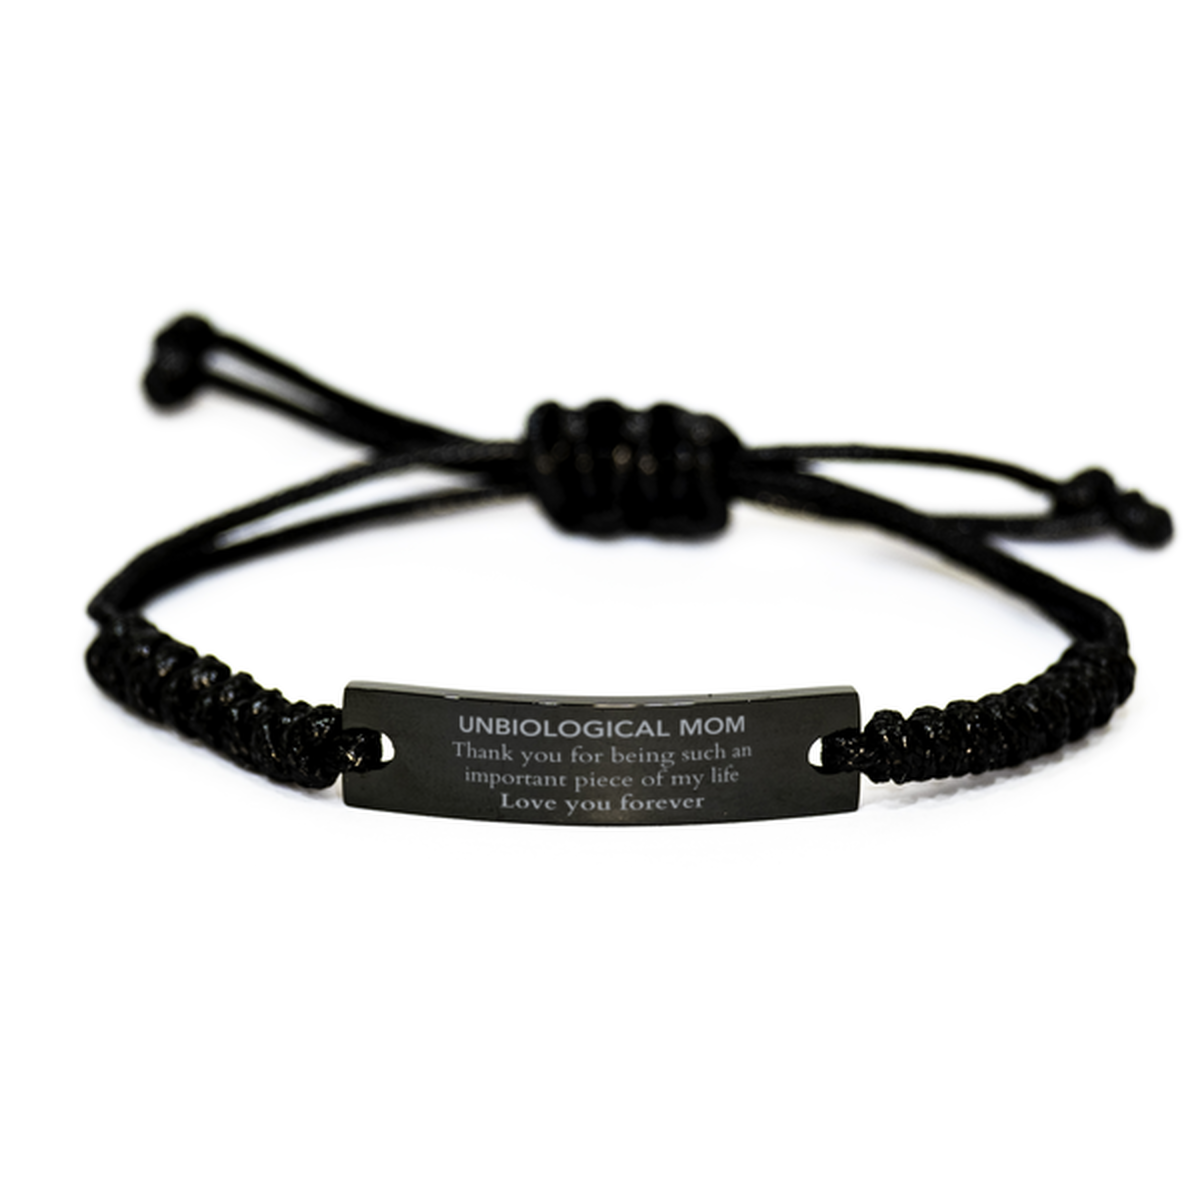 Appropriate Unbiological Mom Black Rope Bracelet Epic Birthday Gifts for Unbiological Mom Thank you for being such an important piece of my life Unbiological Mom Christmas Mothers Fathers Day